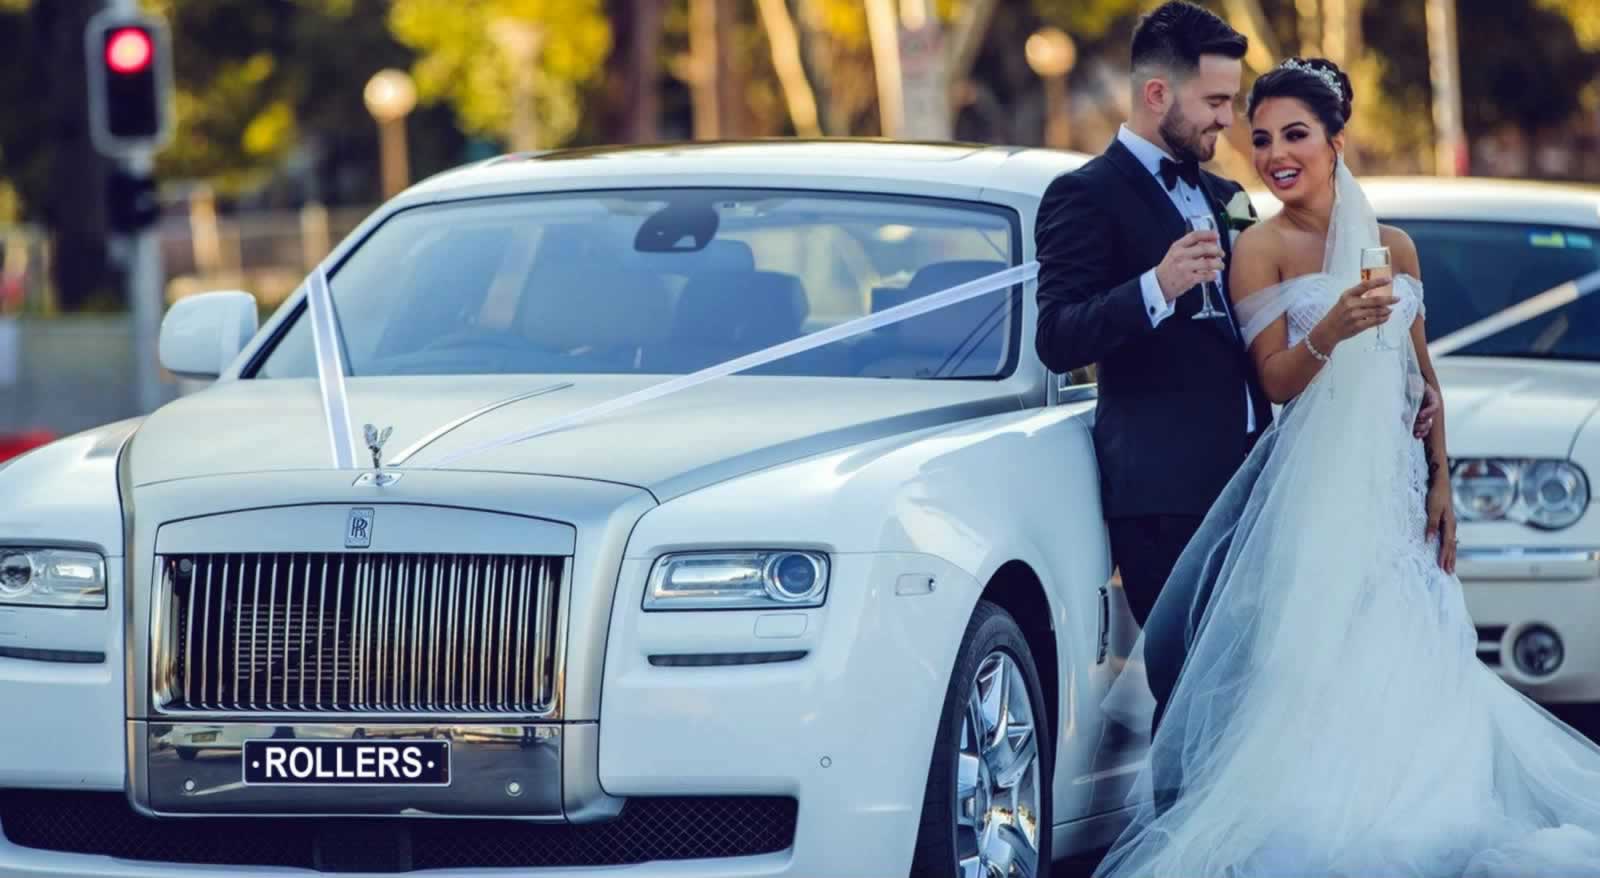 White Rolls -Royce Ghost wedding with bride & groom sipping champagne